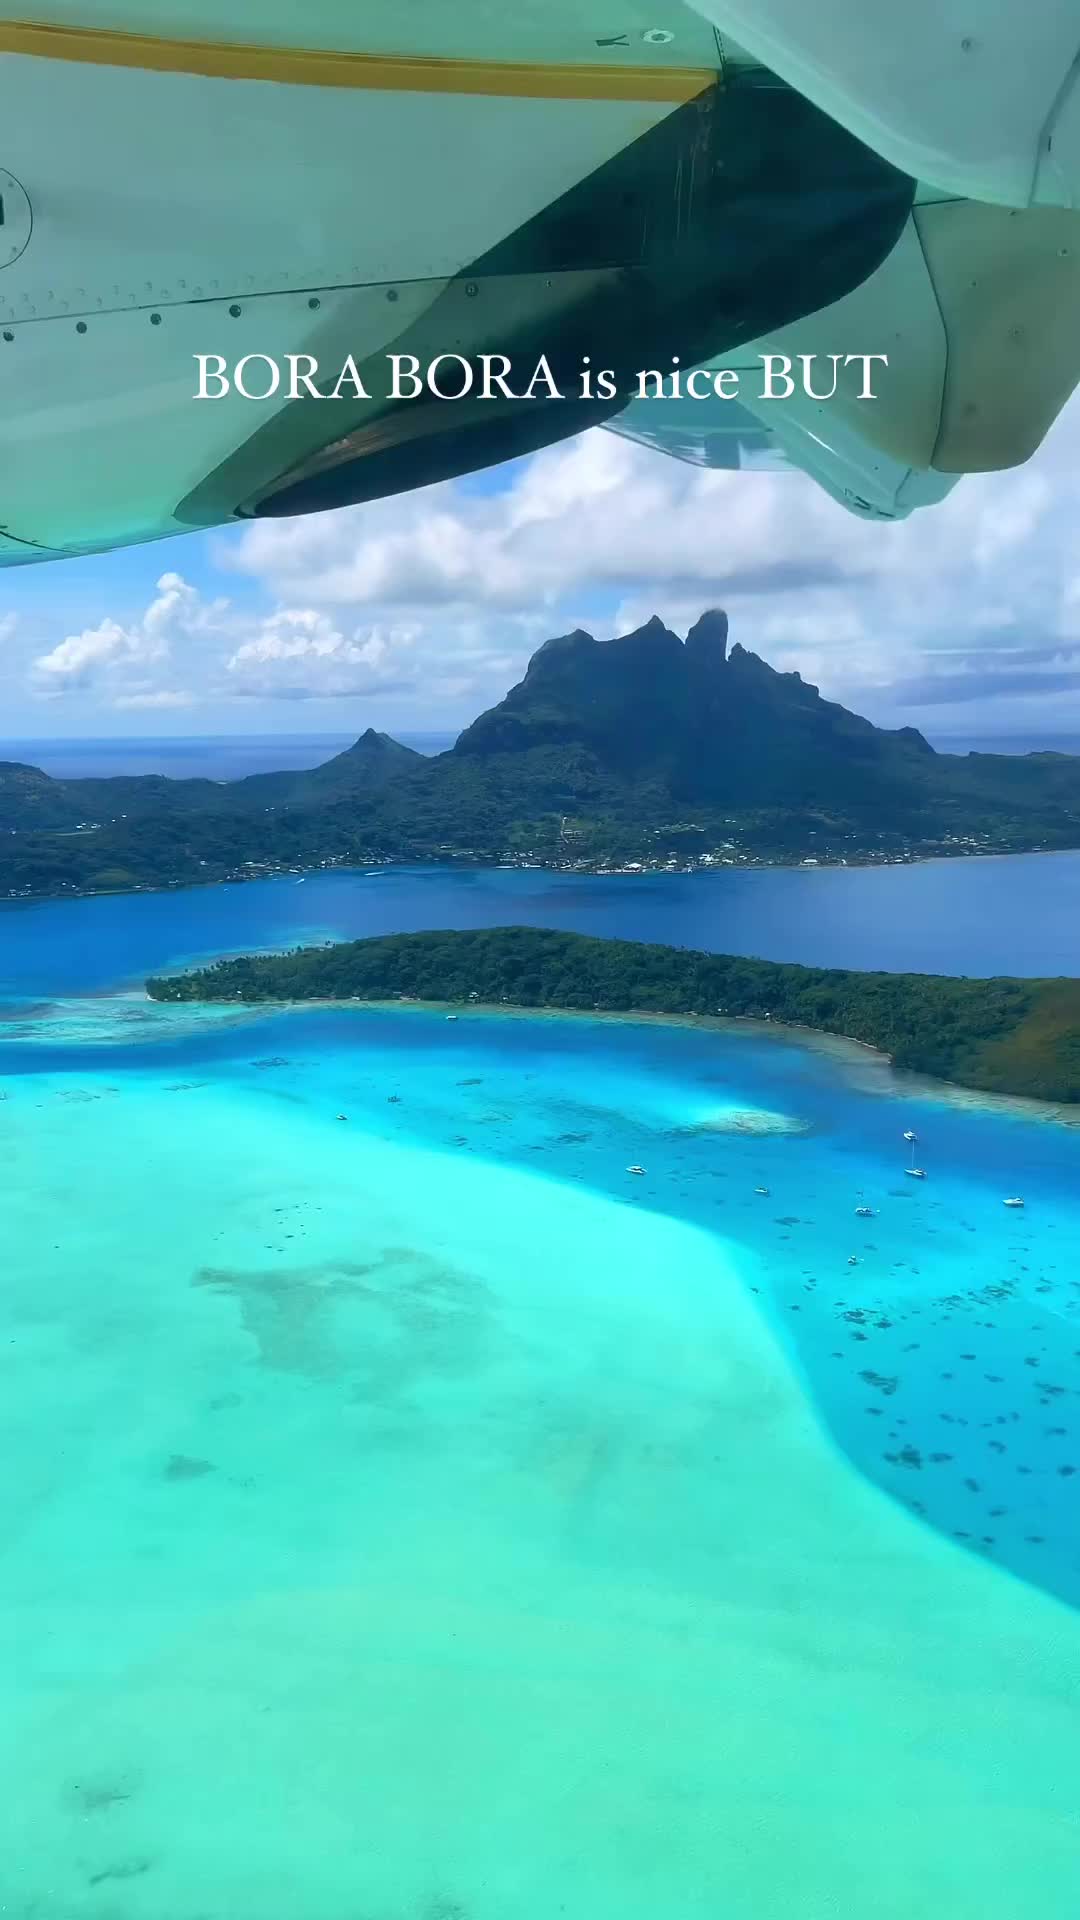 Add Moorea to Your Bucket List - Travel Inspiration 🌴